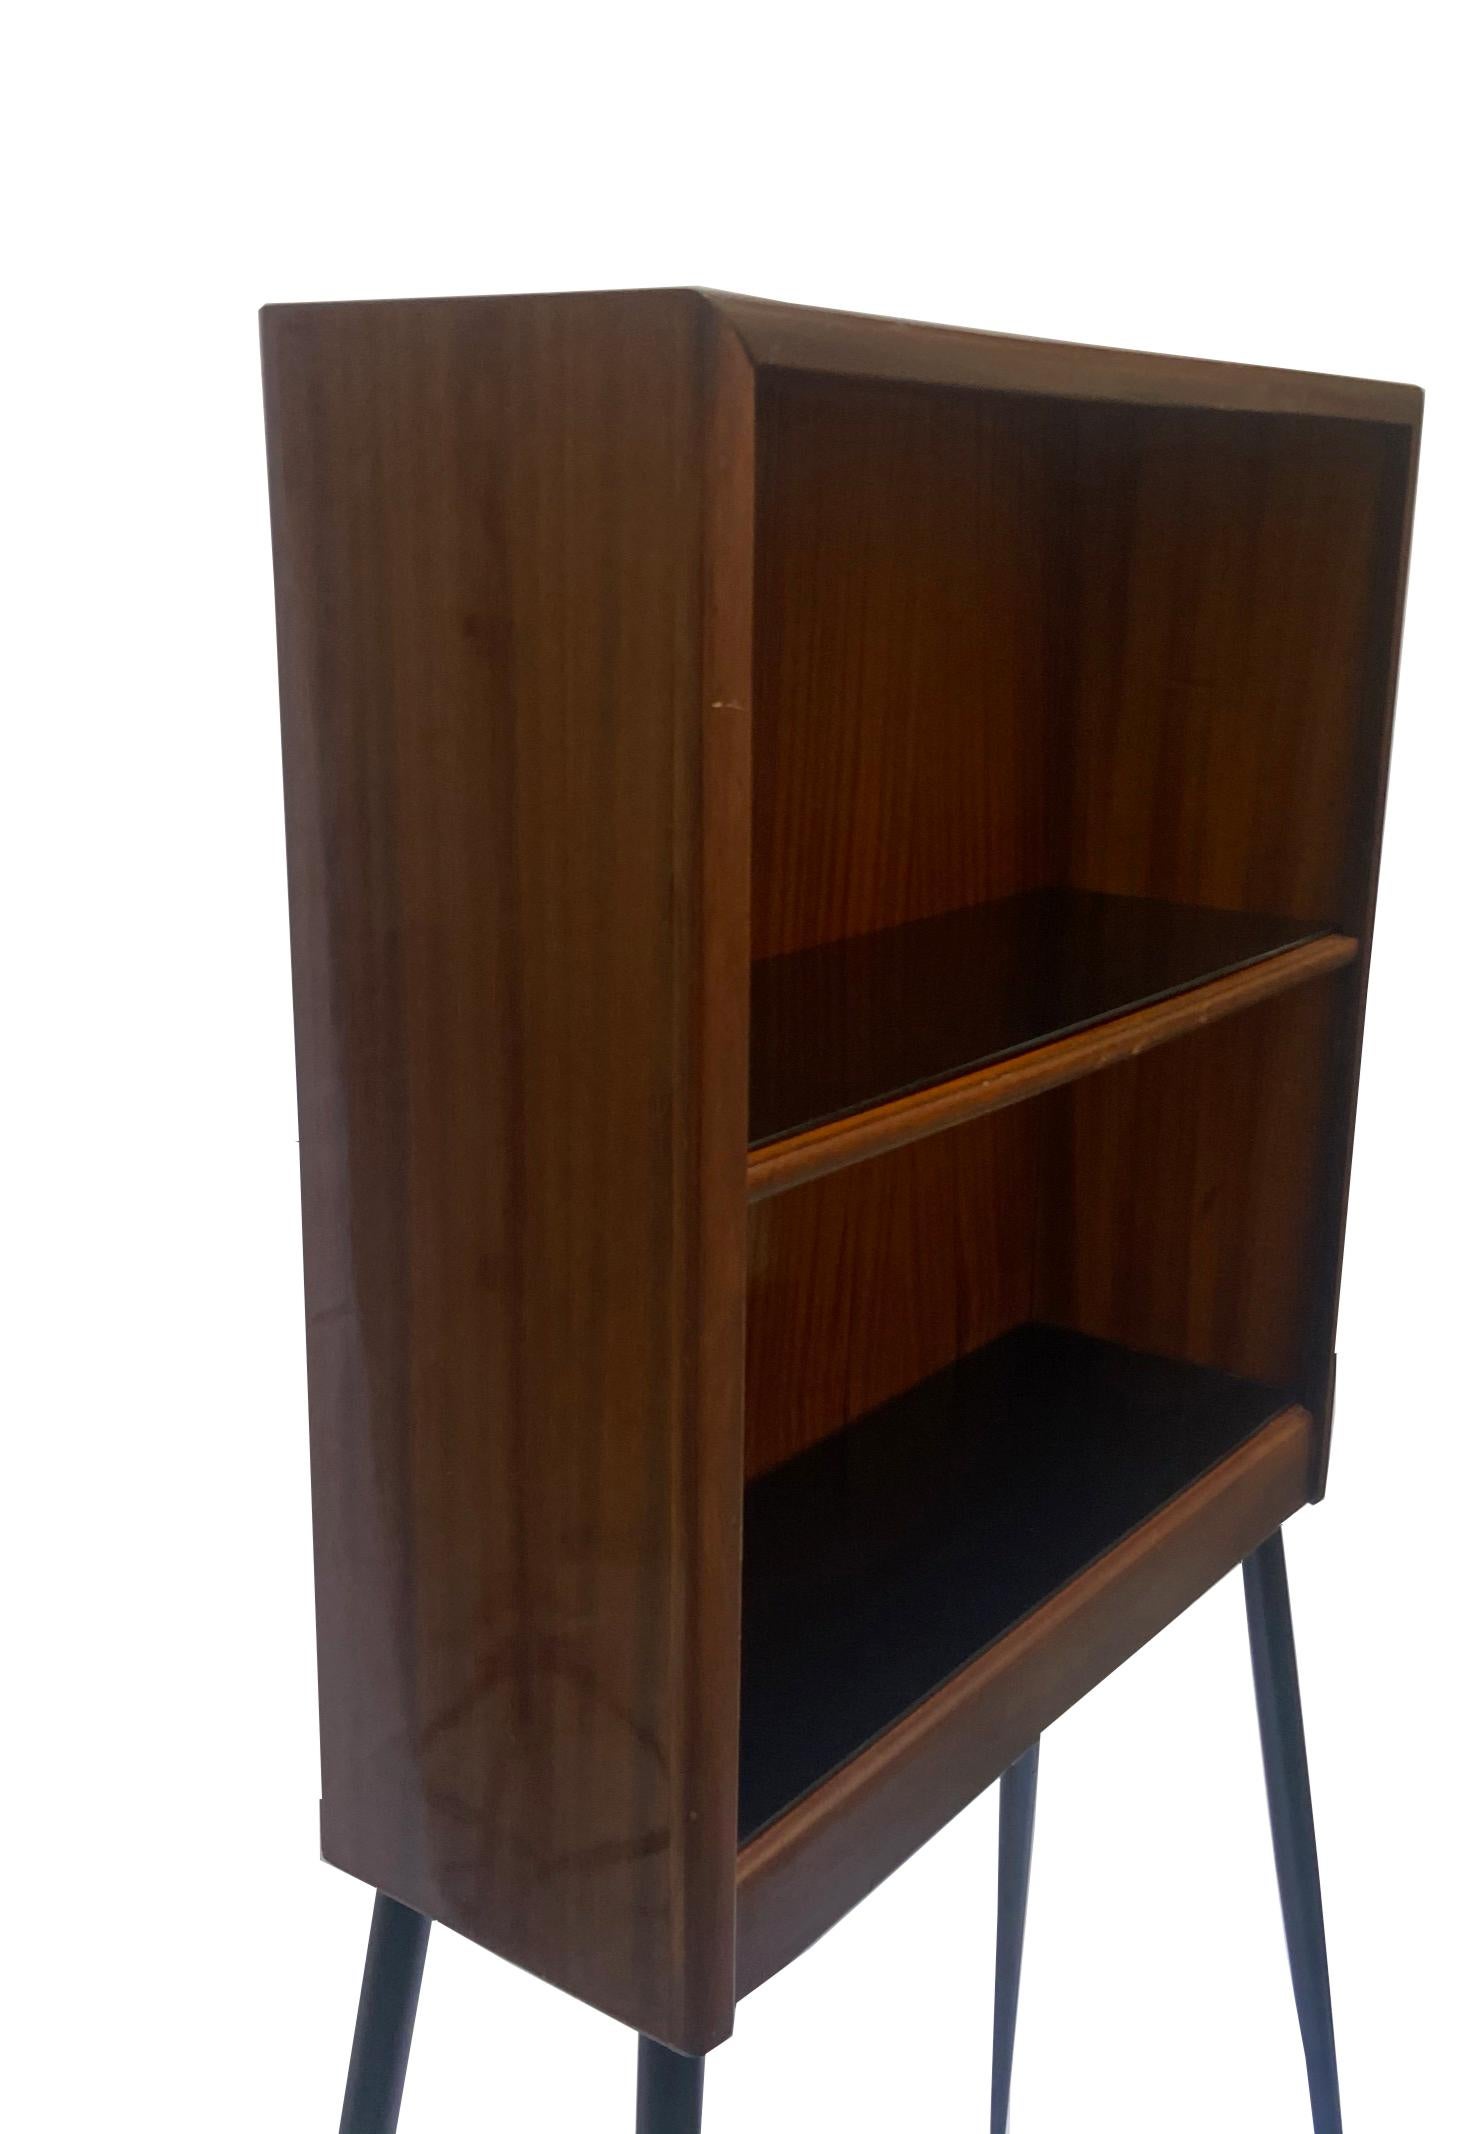 Mid-20th Century Italian Wood Cabinet or Étagère with Black Metal Feet and Brass Ends, 1960s